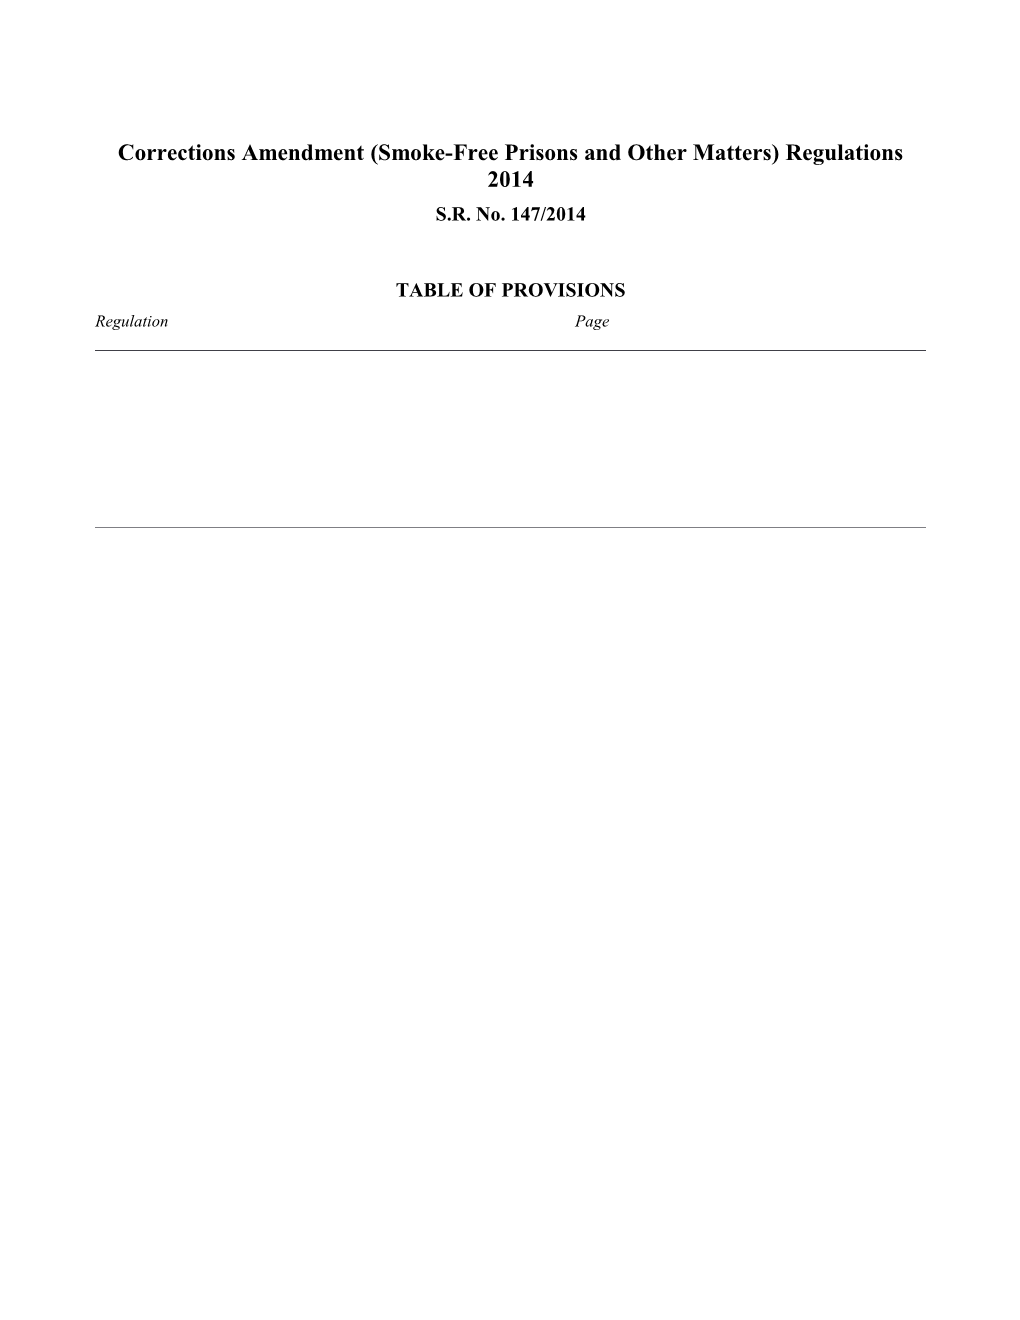 Corrections Amendment (Smoke-Free Prisons and Other Matters) Regulations 2014